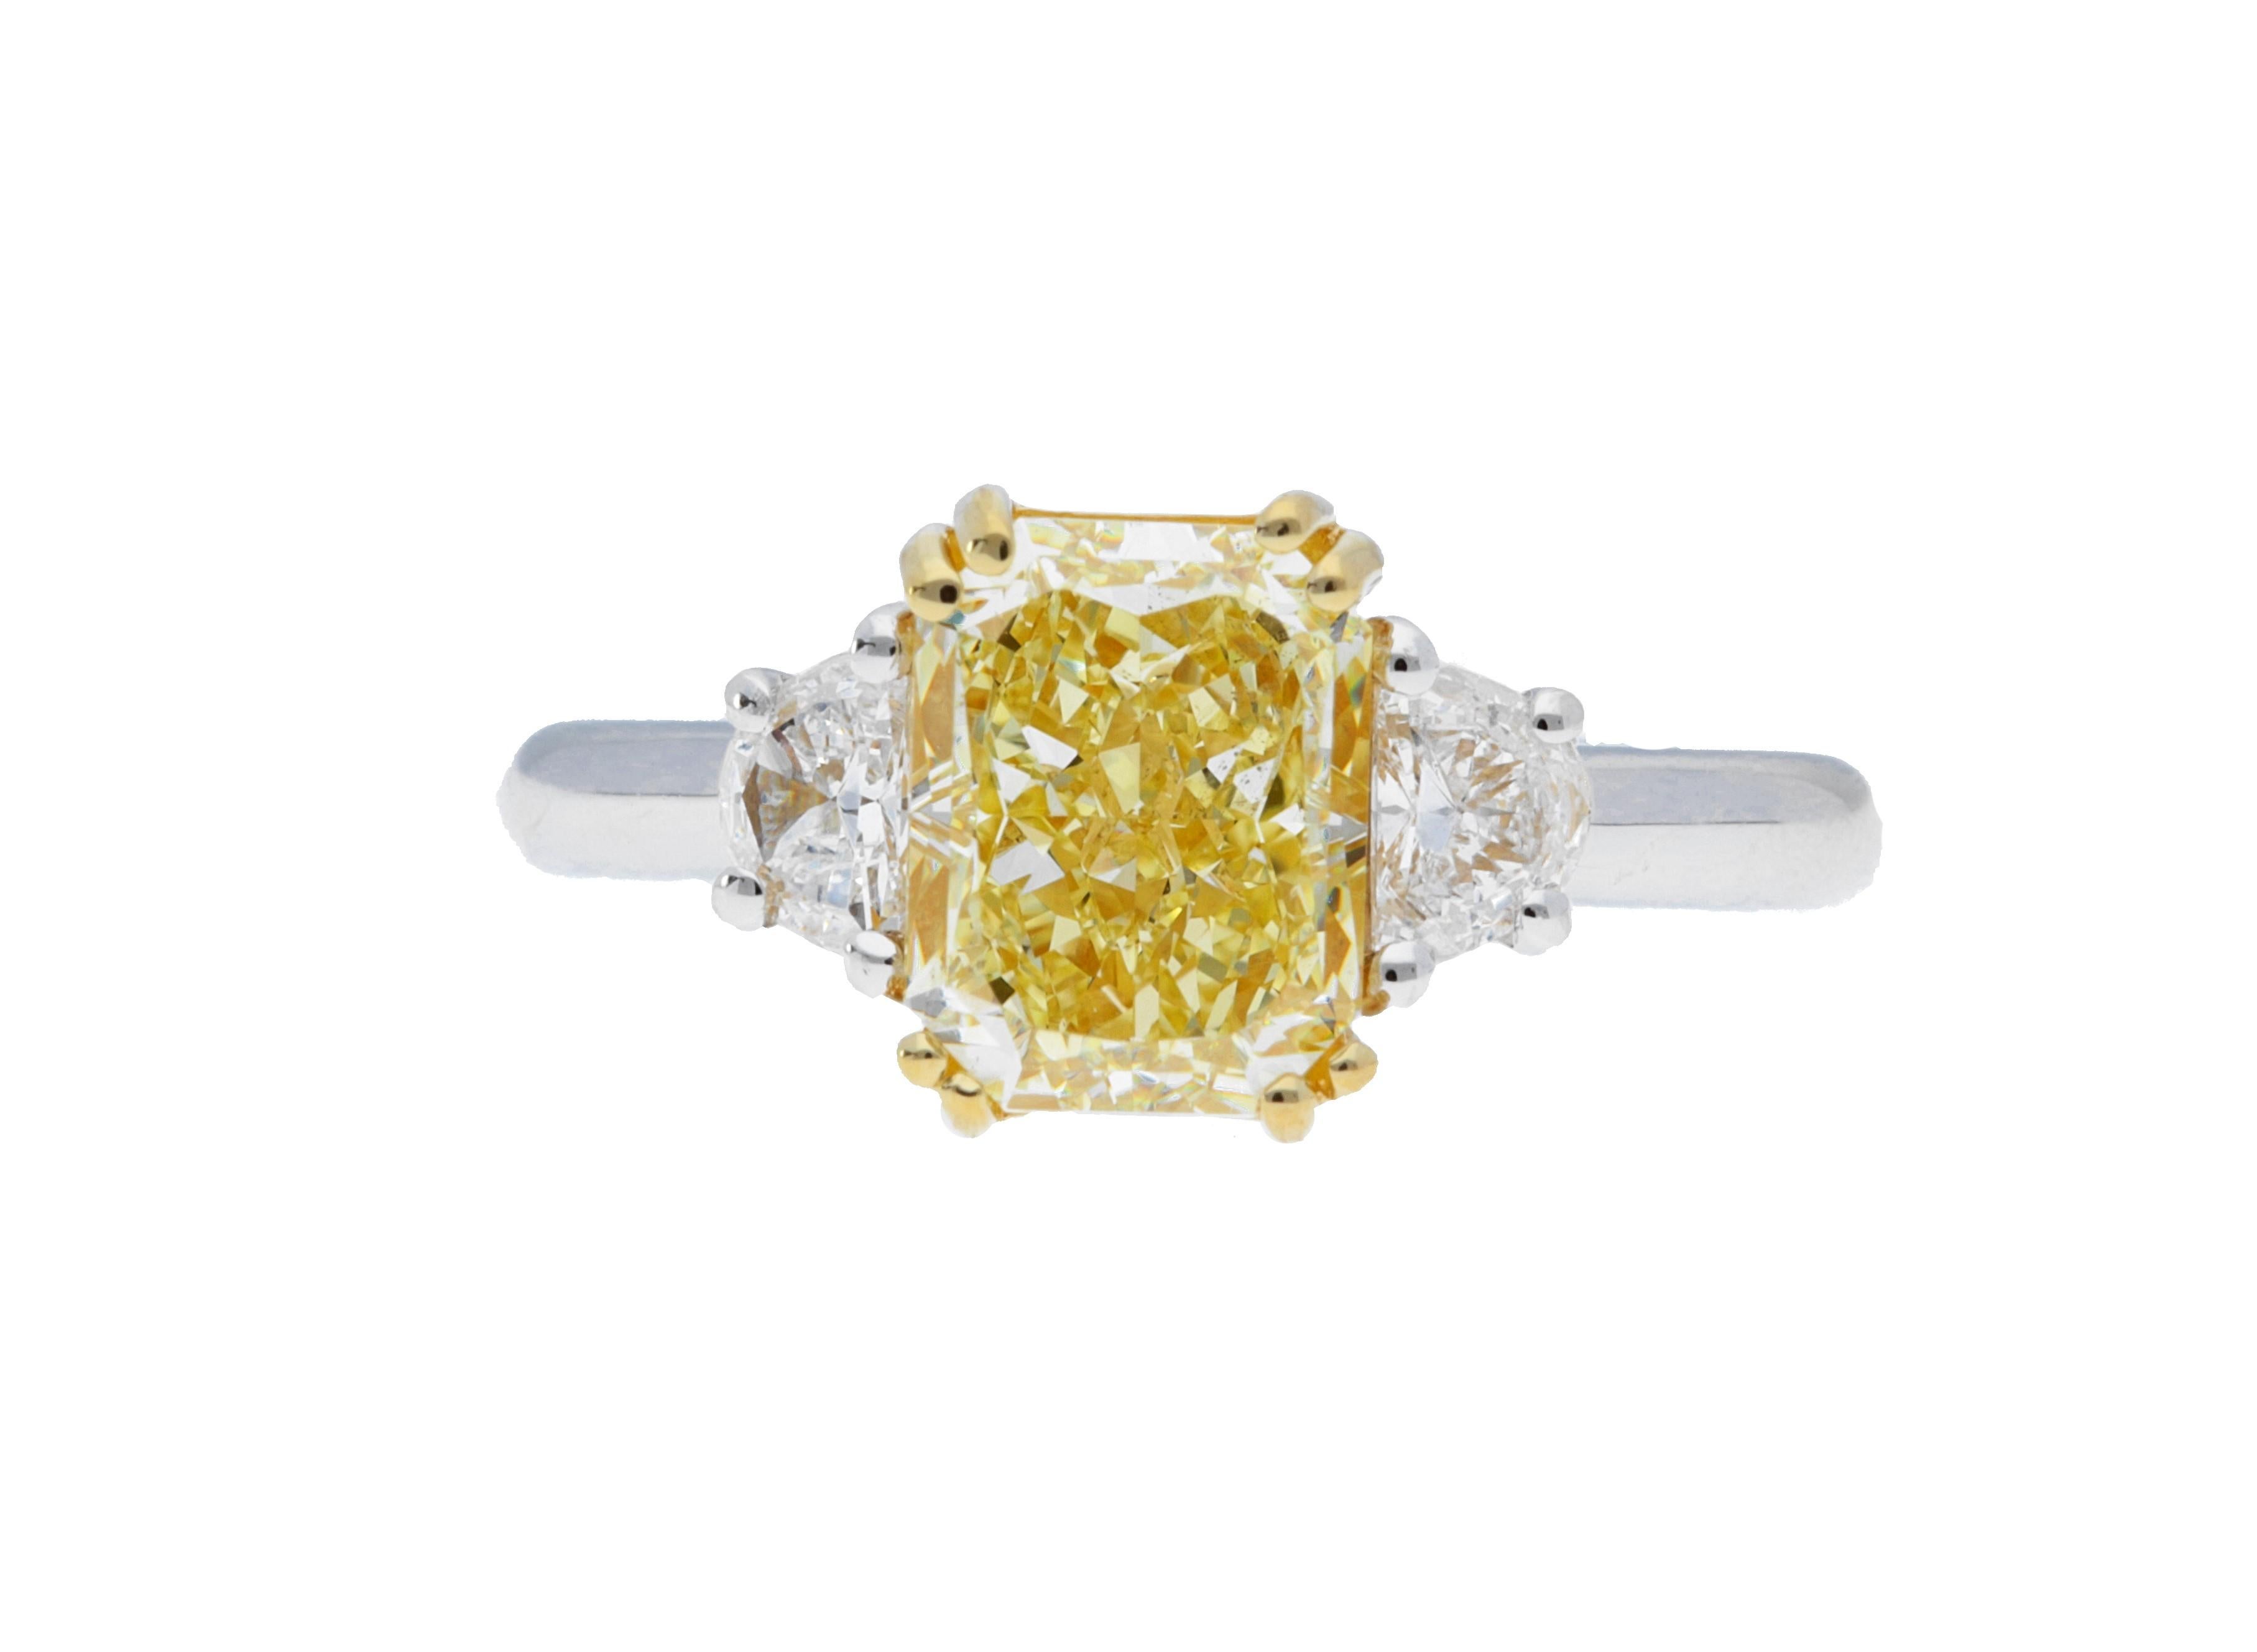 A Sofer Jewelry Original. GIA certified 2.29ct fancy yellow SI2 radiant diamond with two half-moon side stones weighing 0.38 carats total set in platinum and 18 karat yellow gold. Size 6.